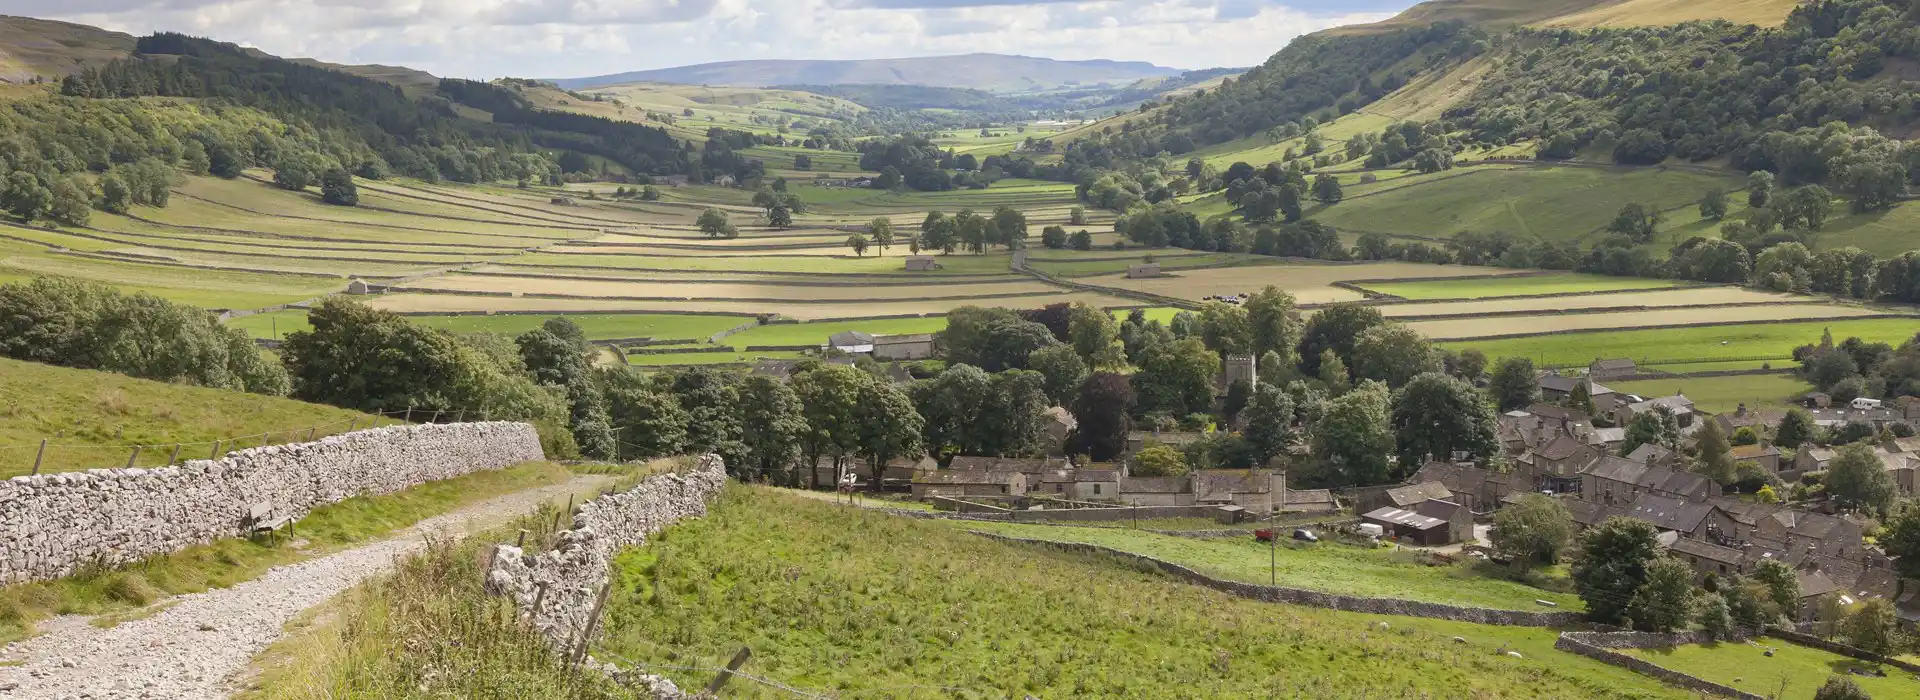 Campsites in Wharfedale